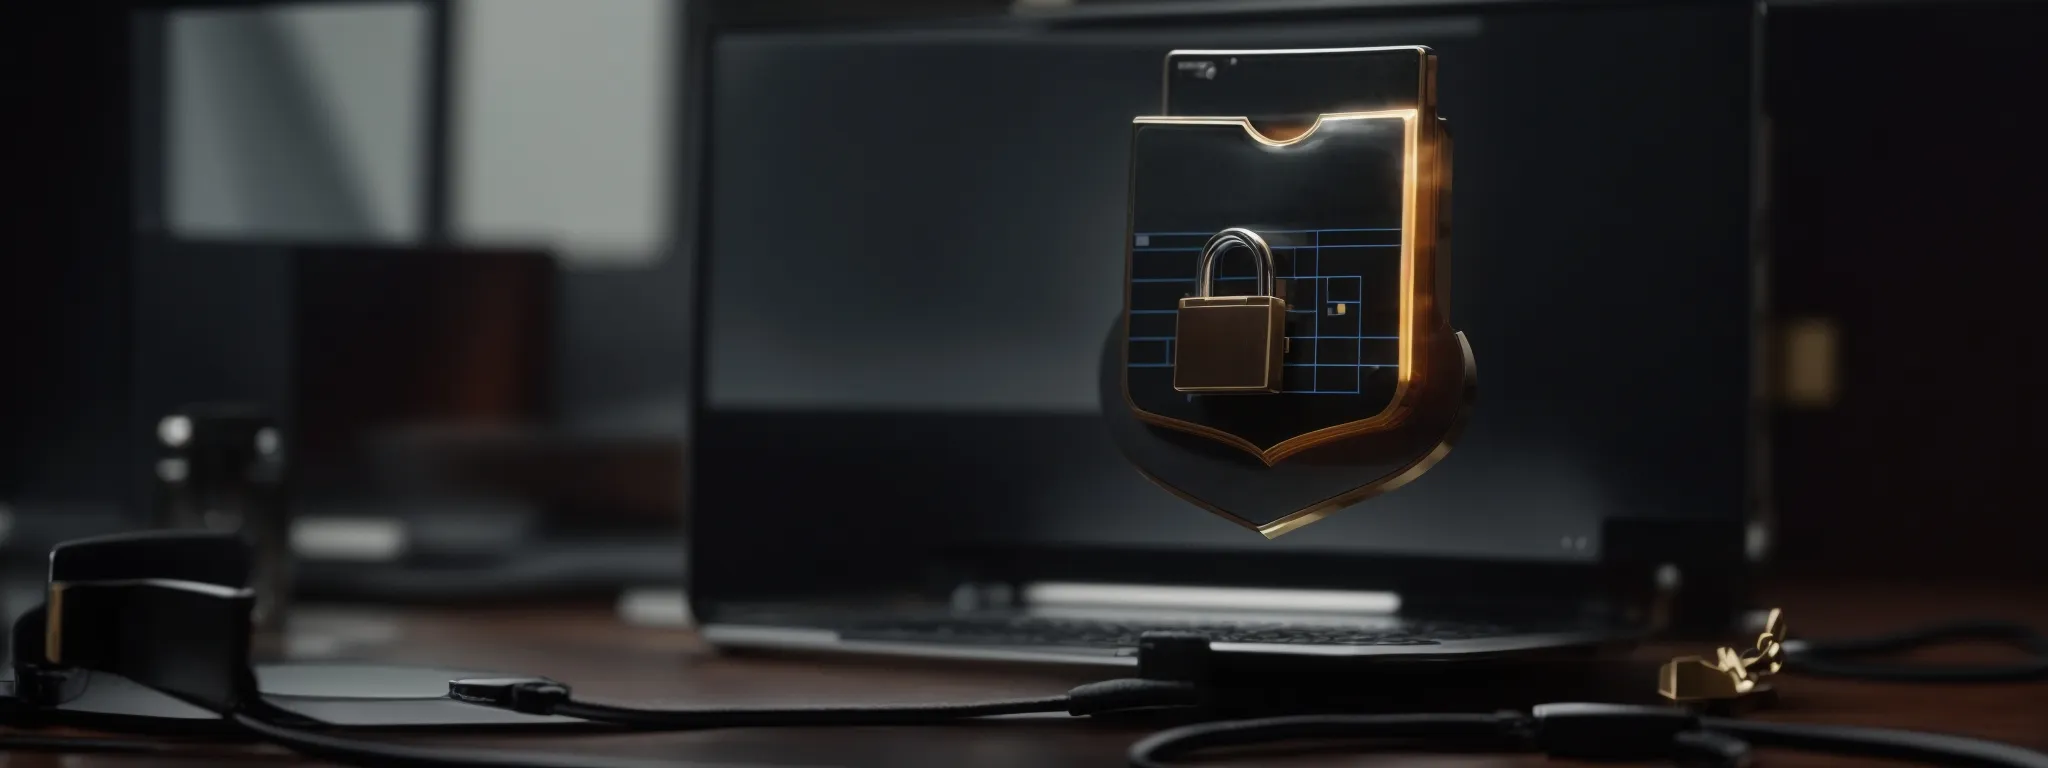 a laptop with a shield icon on the screen surrounded by a padlock, a copyright symbol, and a magnifying glass, symbolizing online content protection.